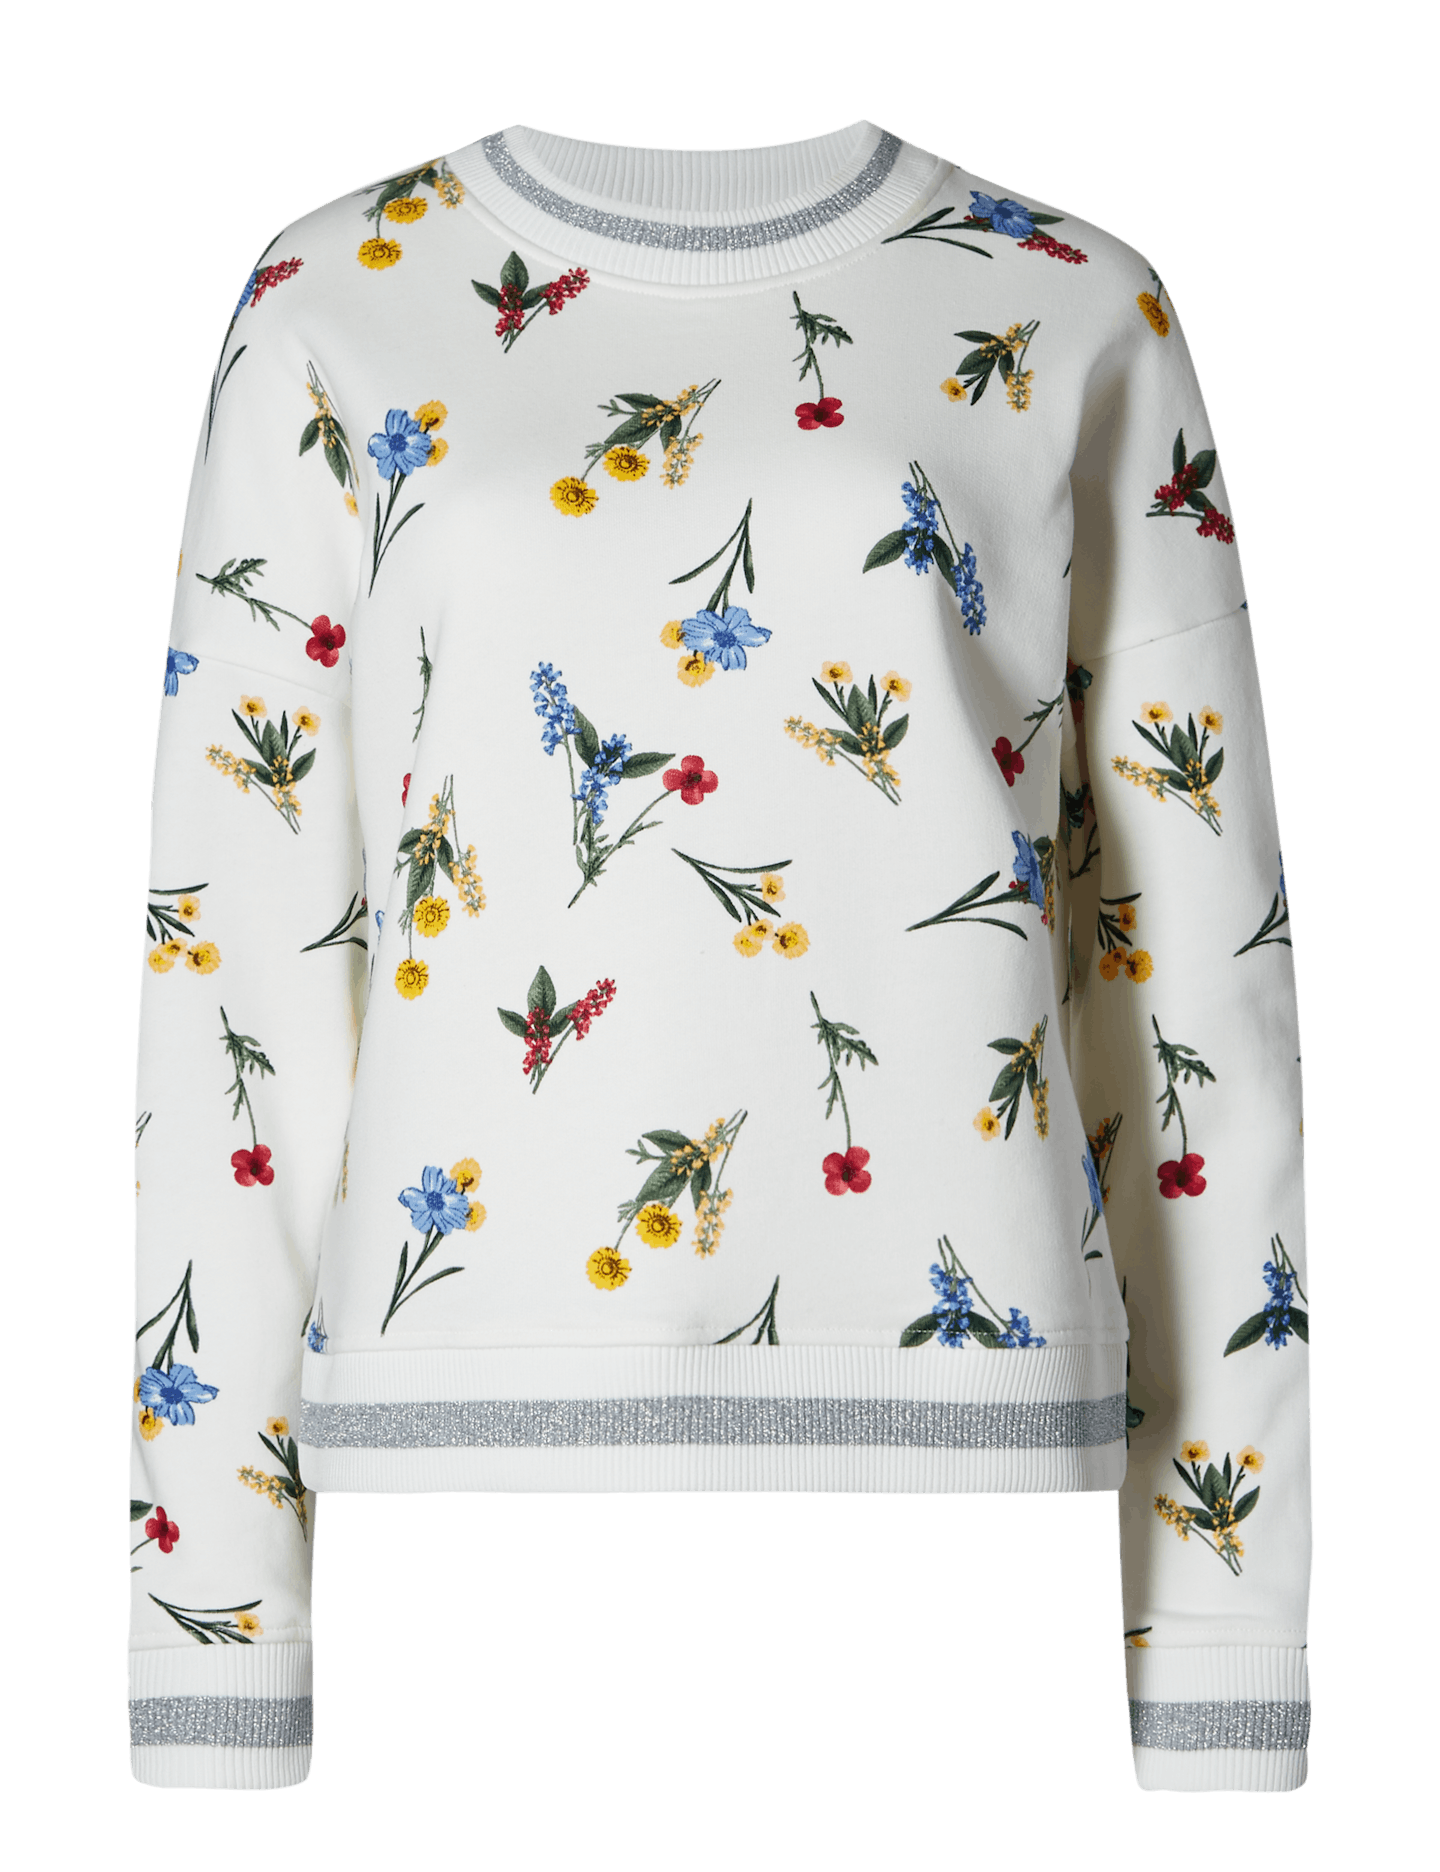 M&S Limited Edition Floral Sweat Top 29.50